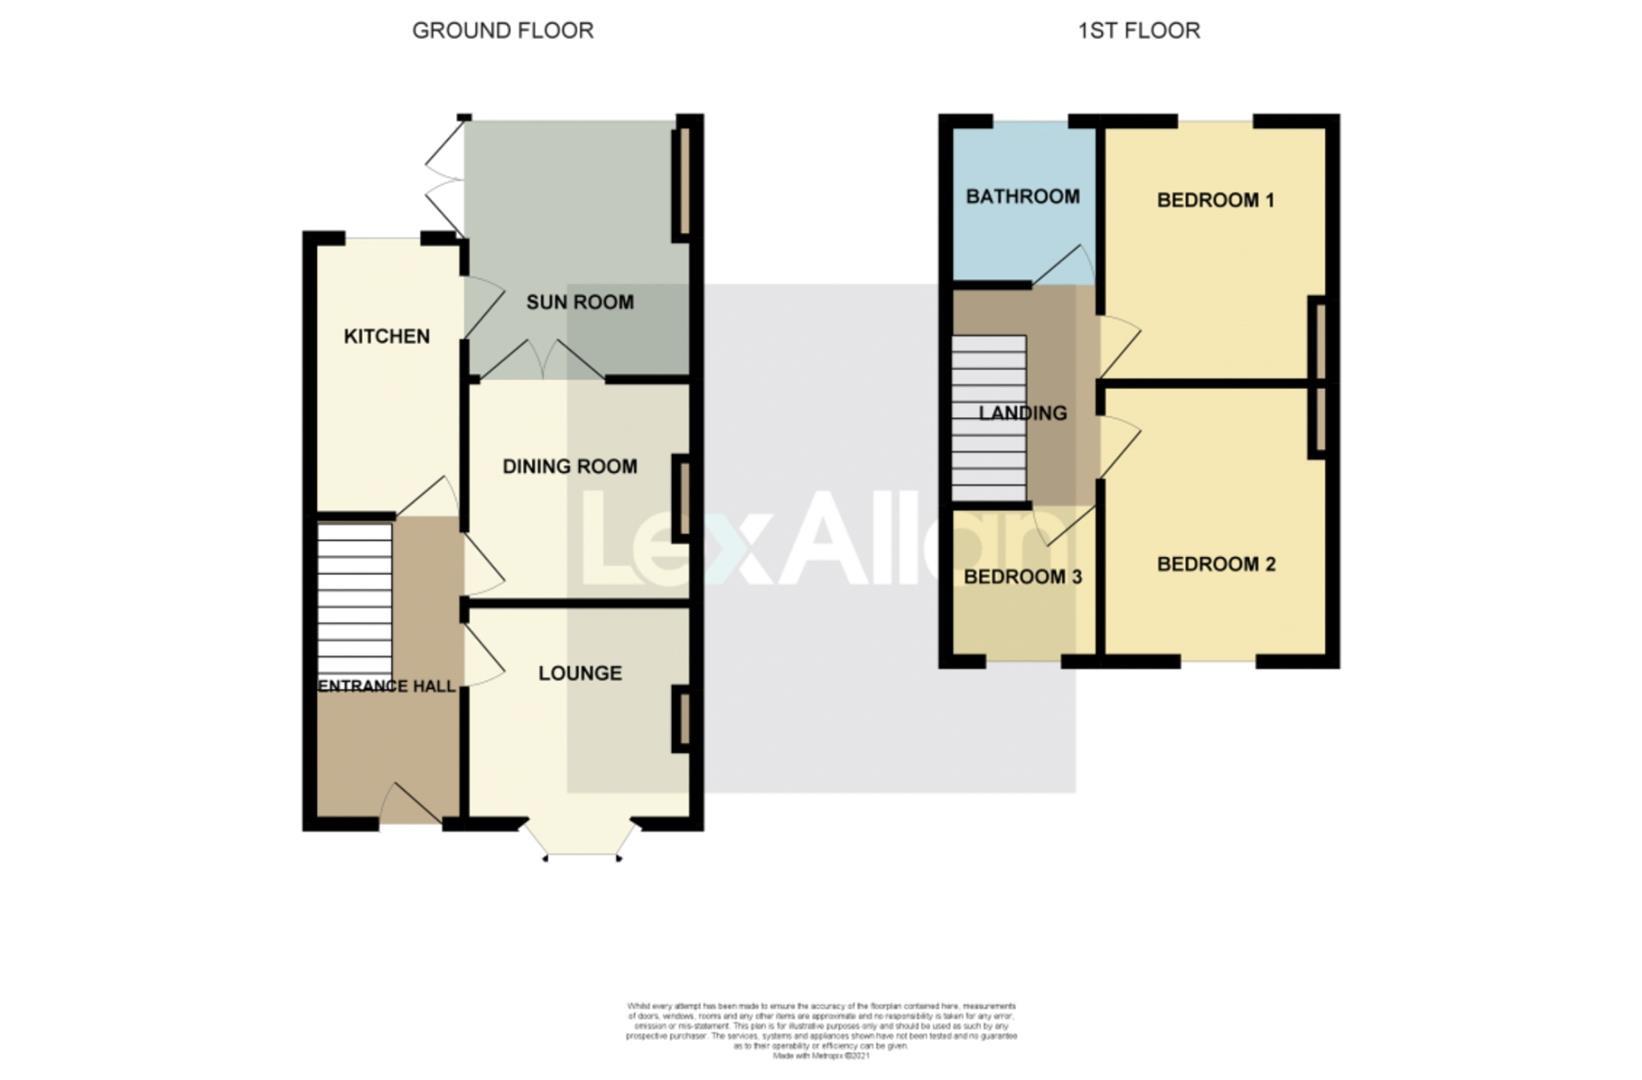 3 bed terraced house for sale - Property floorplan